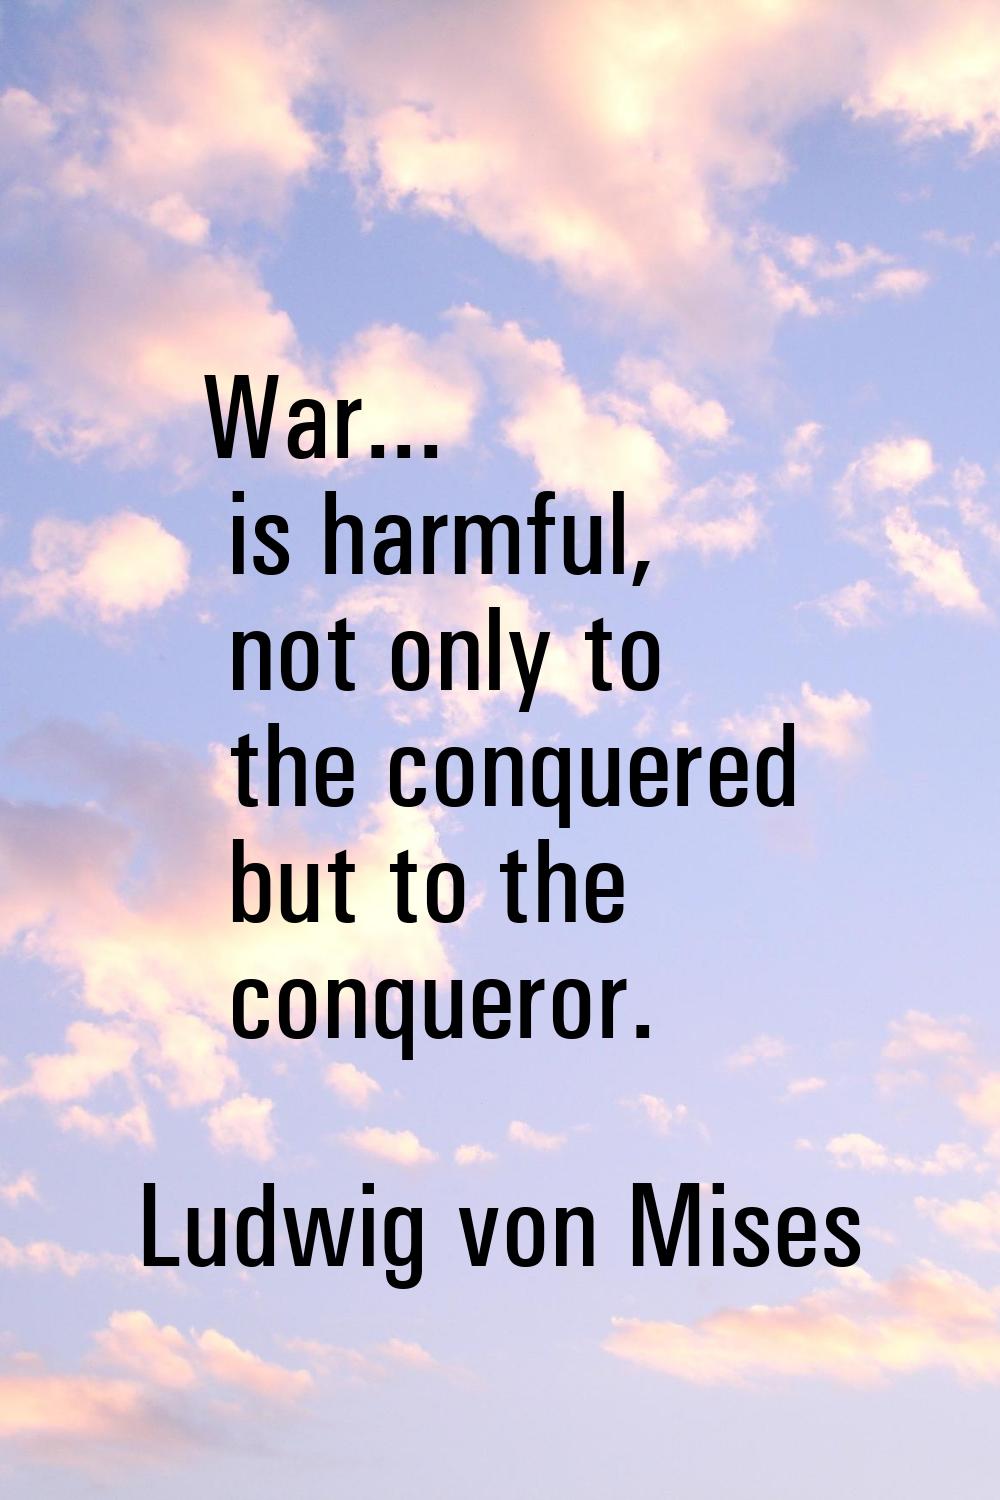 War... is harmful, not only to the conquered but to the conqueror.